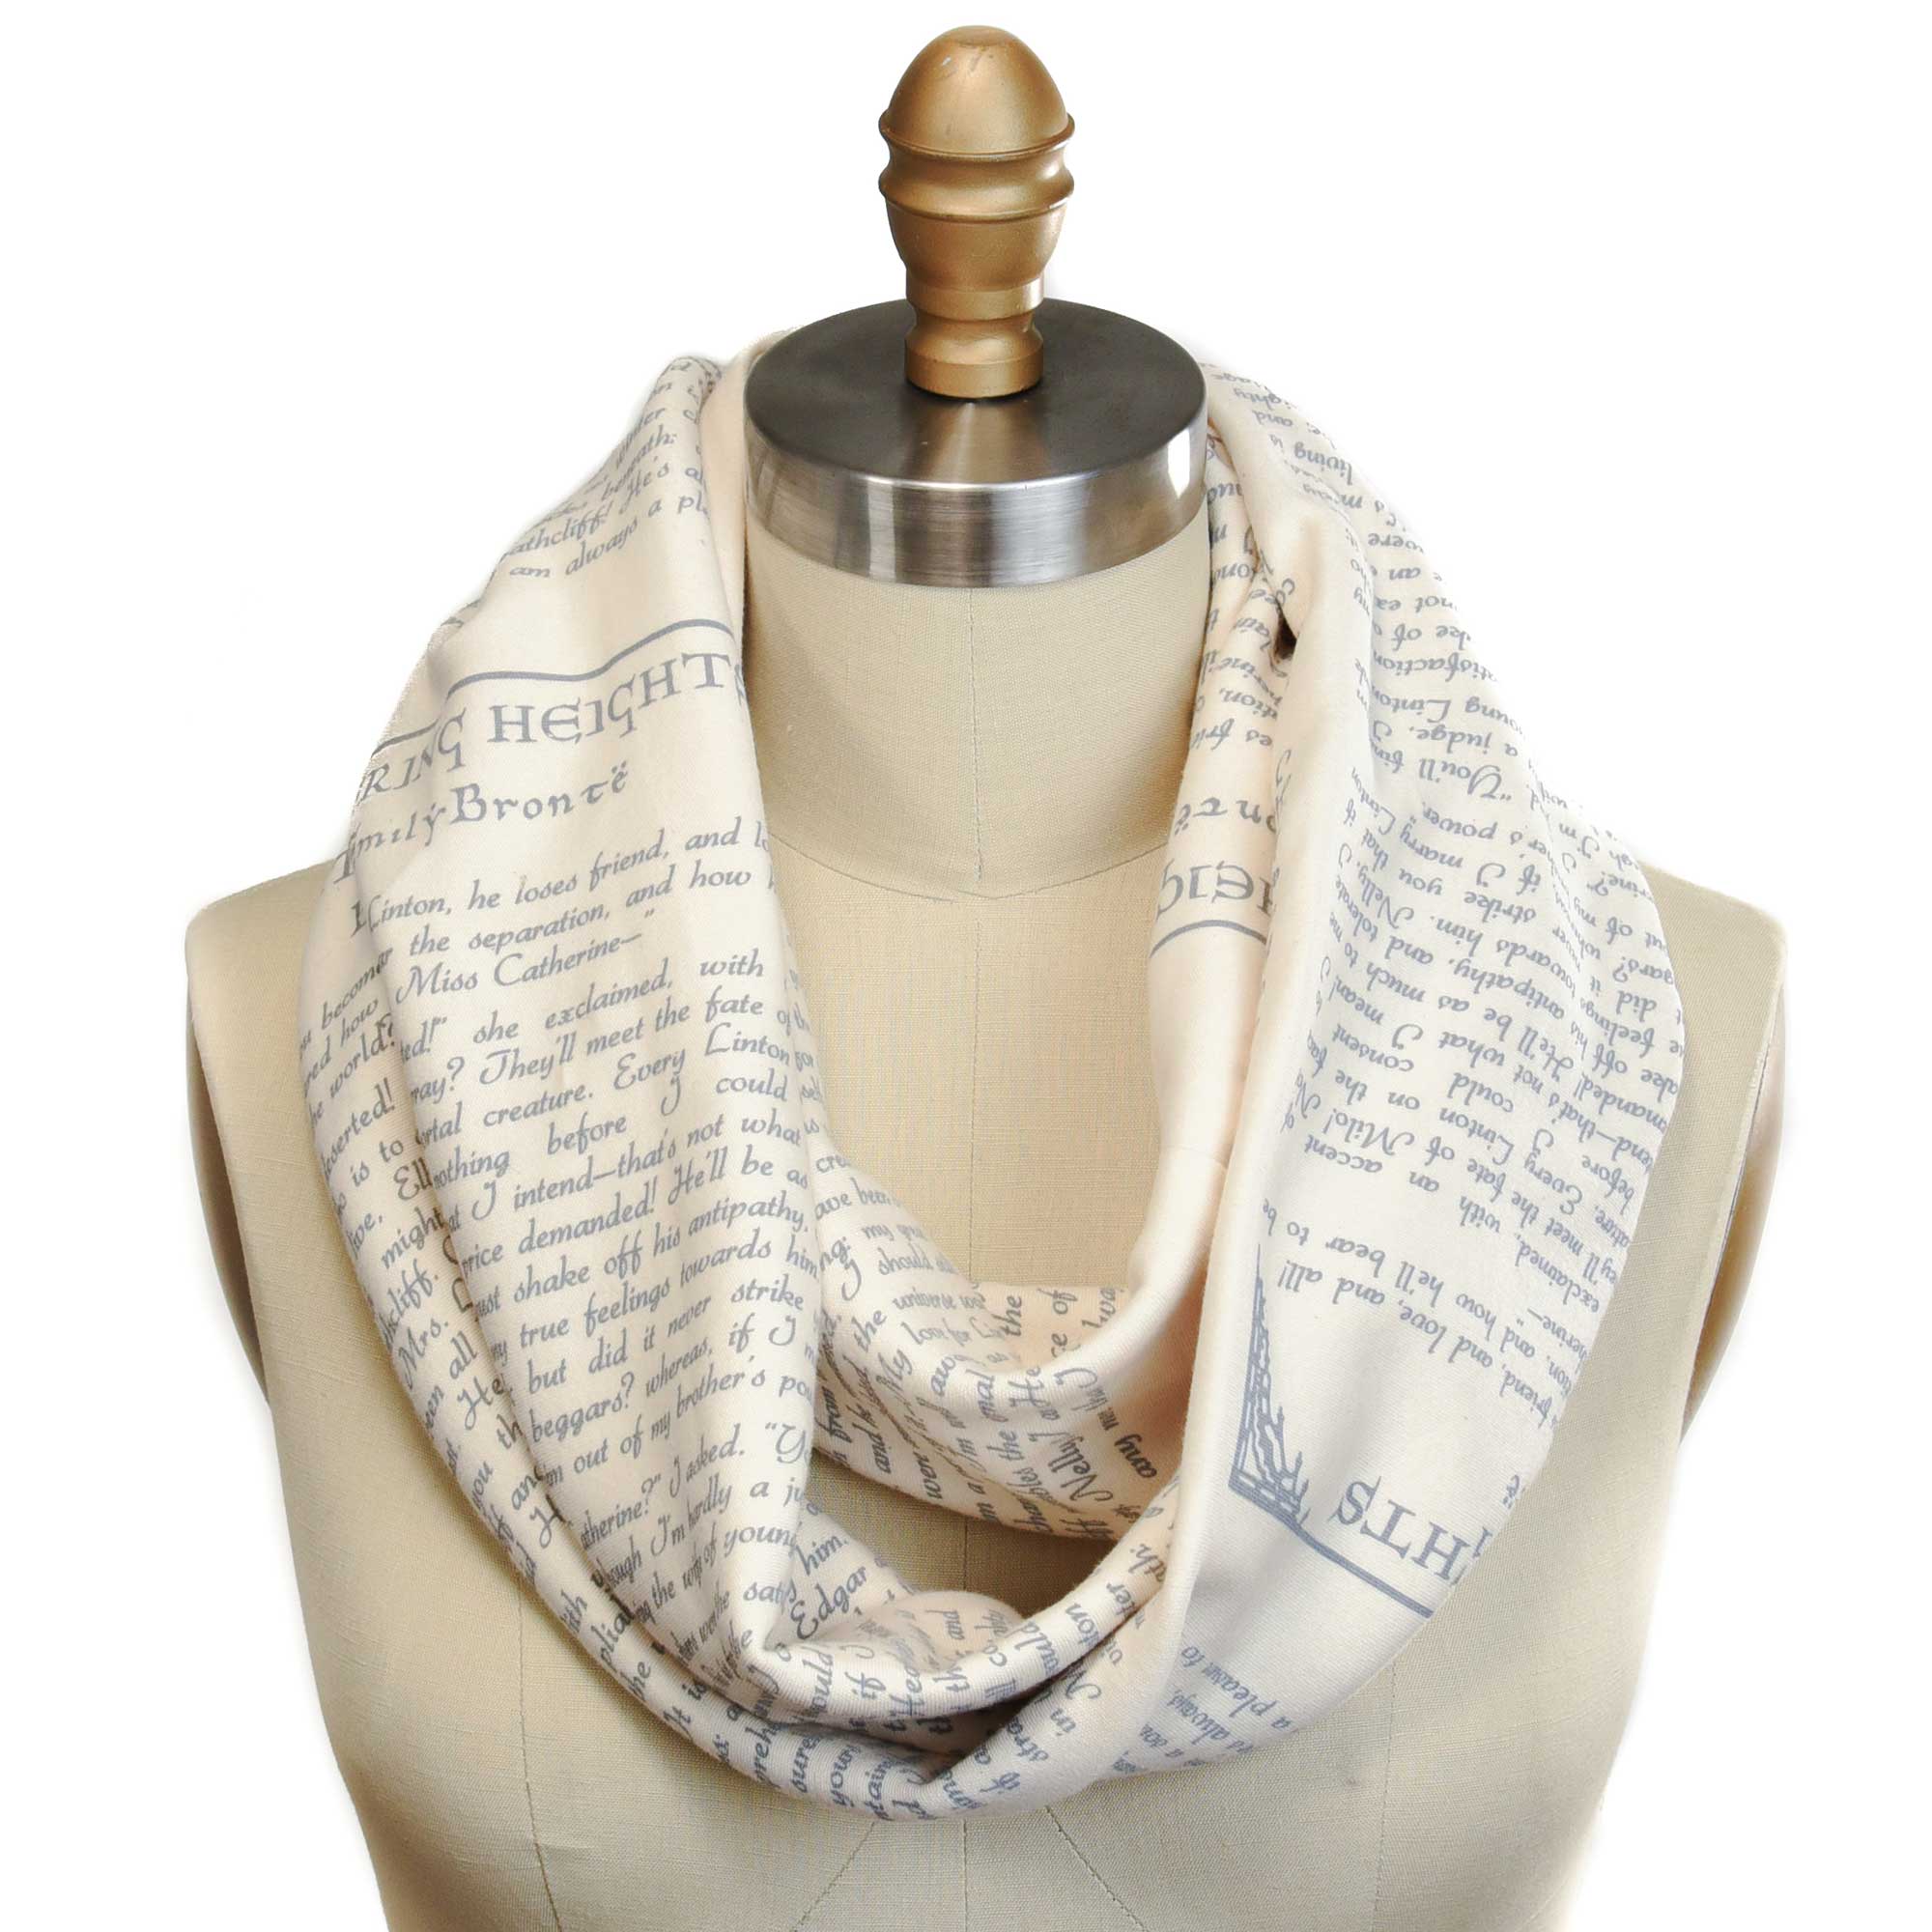 Wuthering Heights Book Scarf